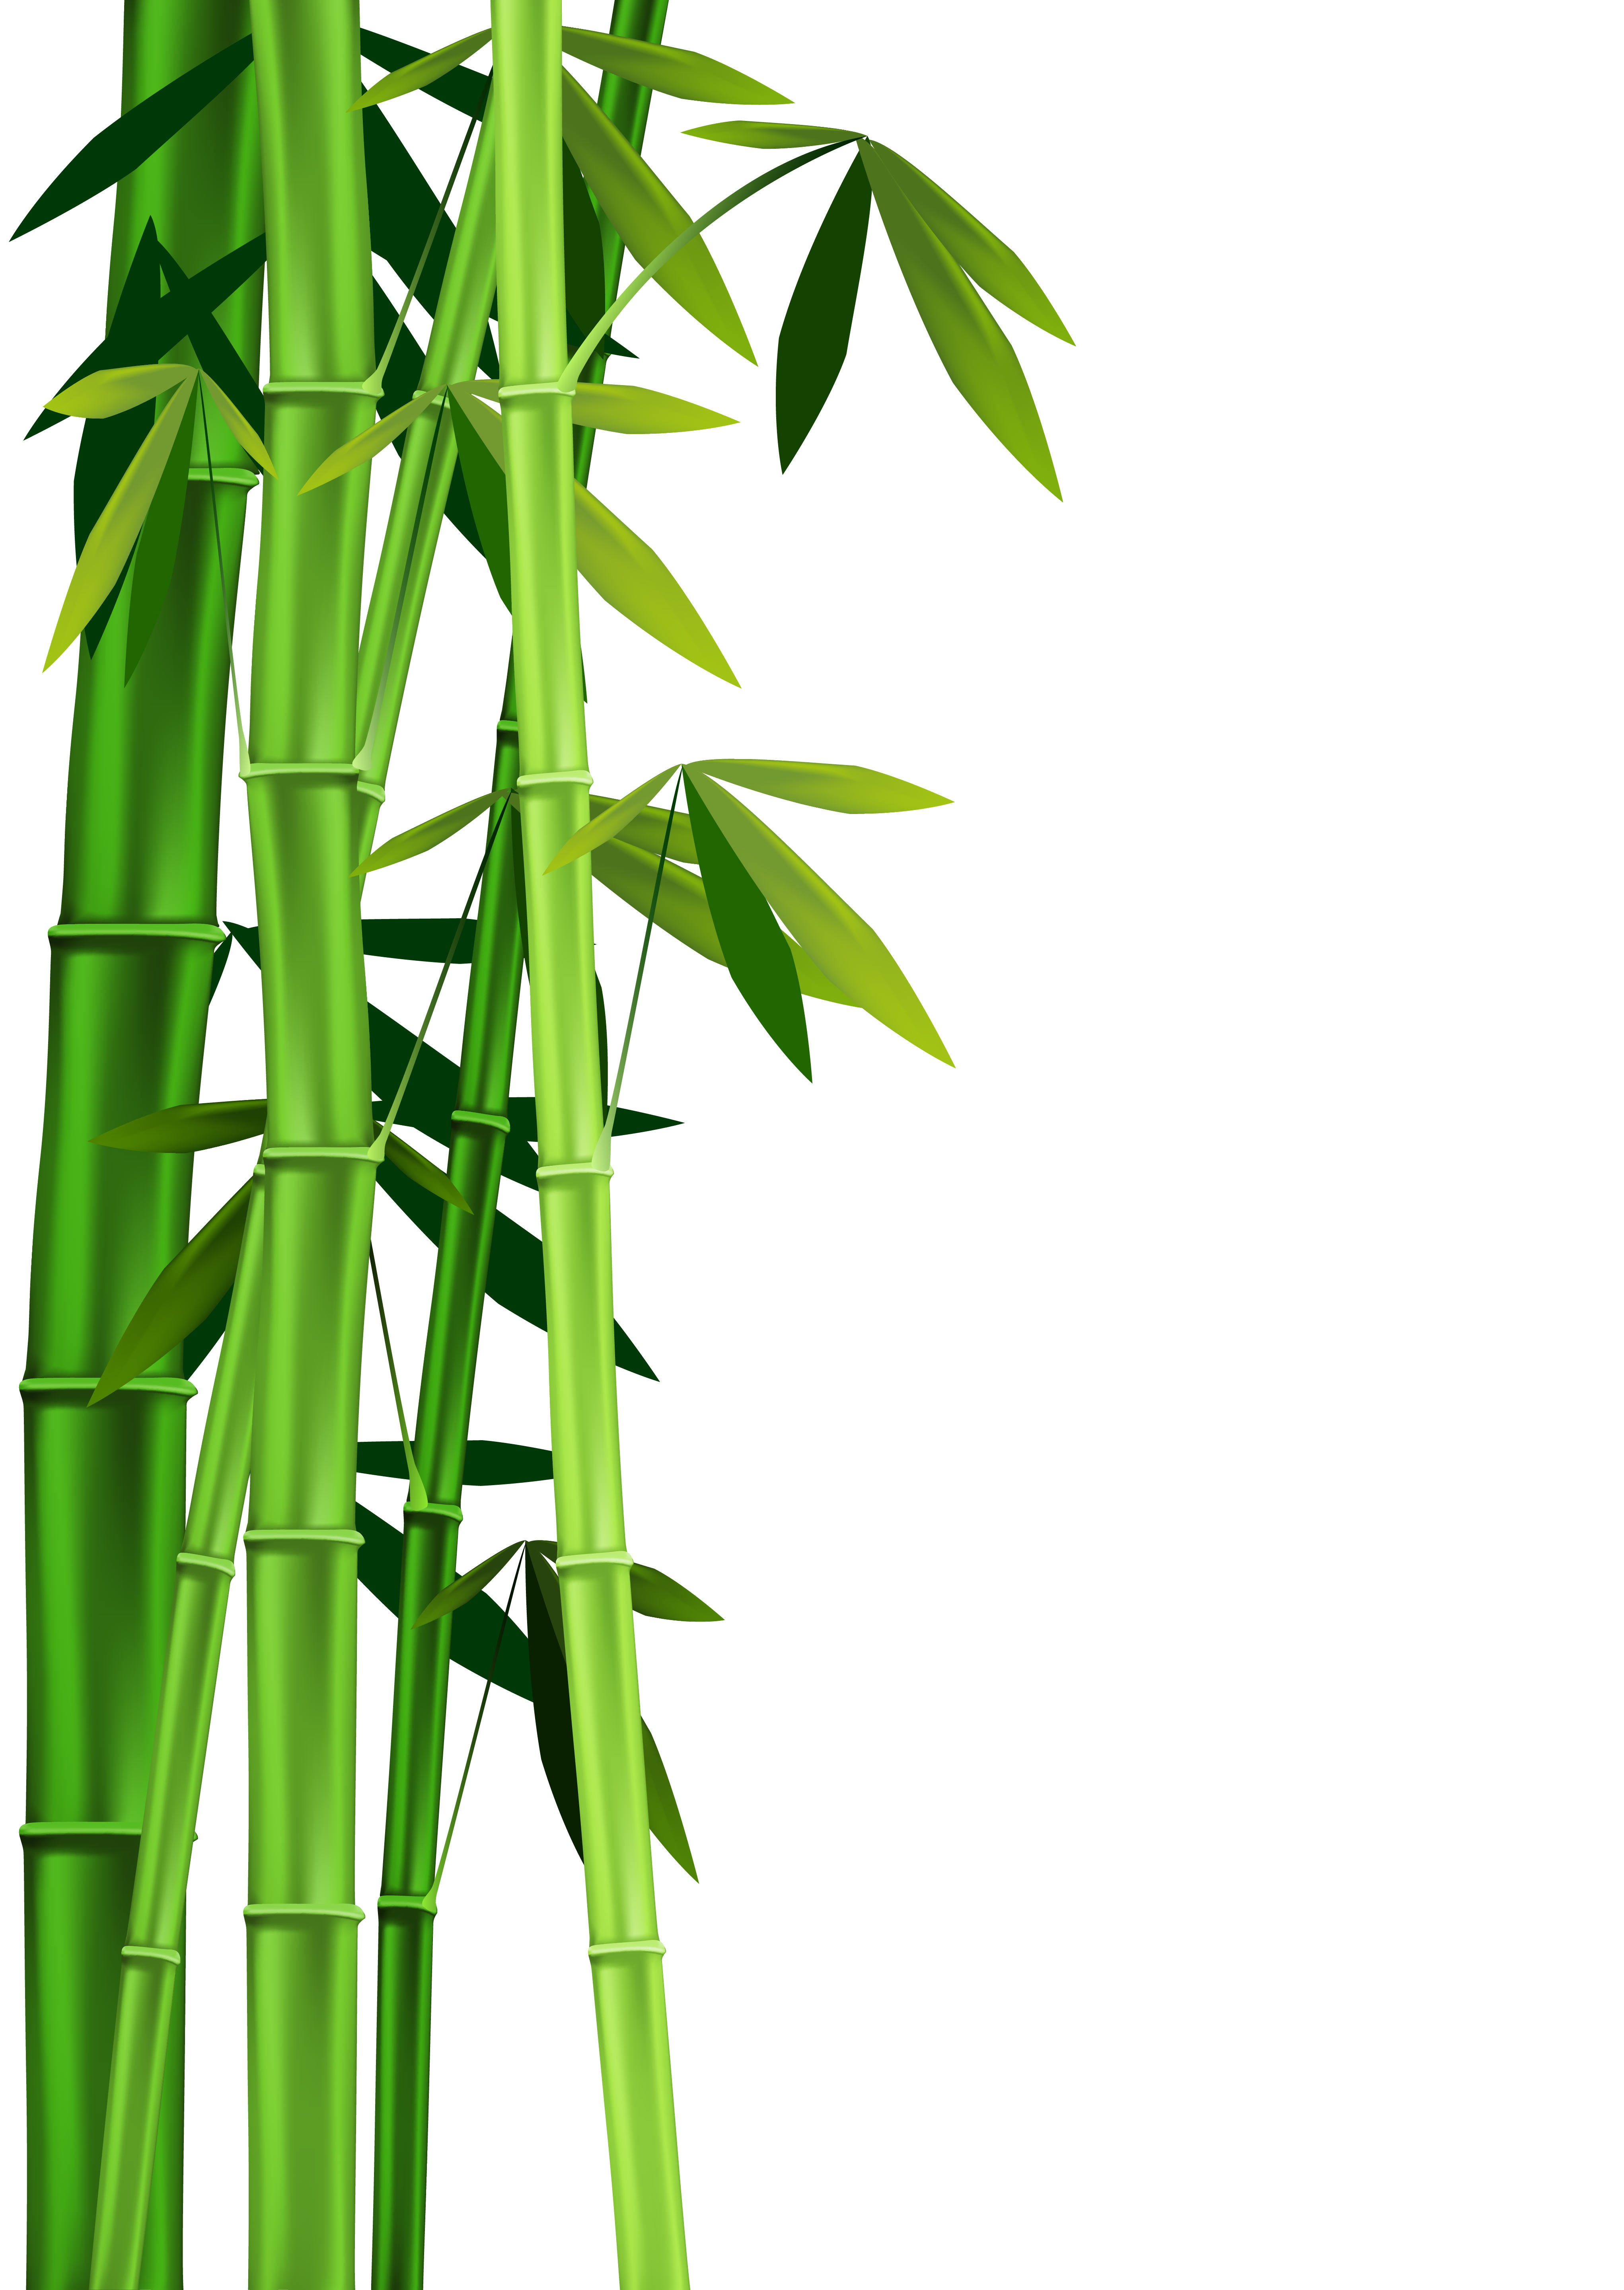 Bamboo border free download clipart 3 